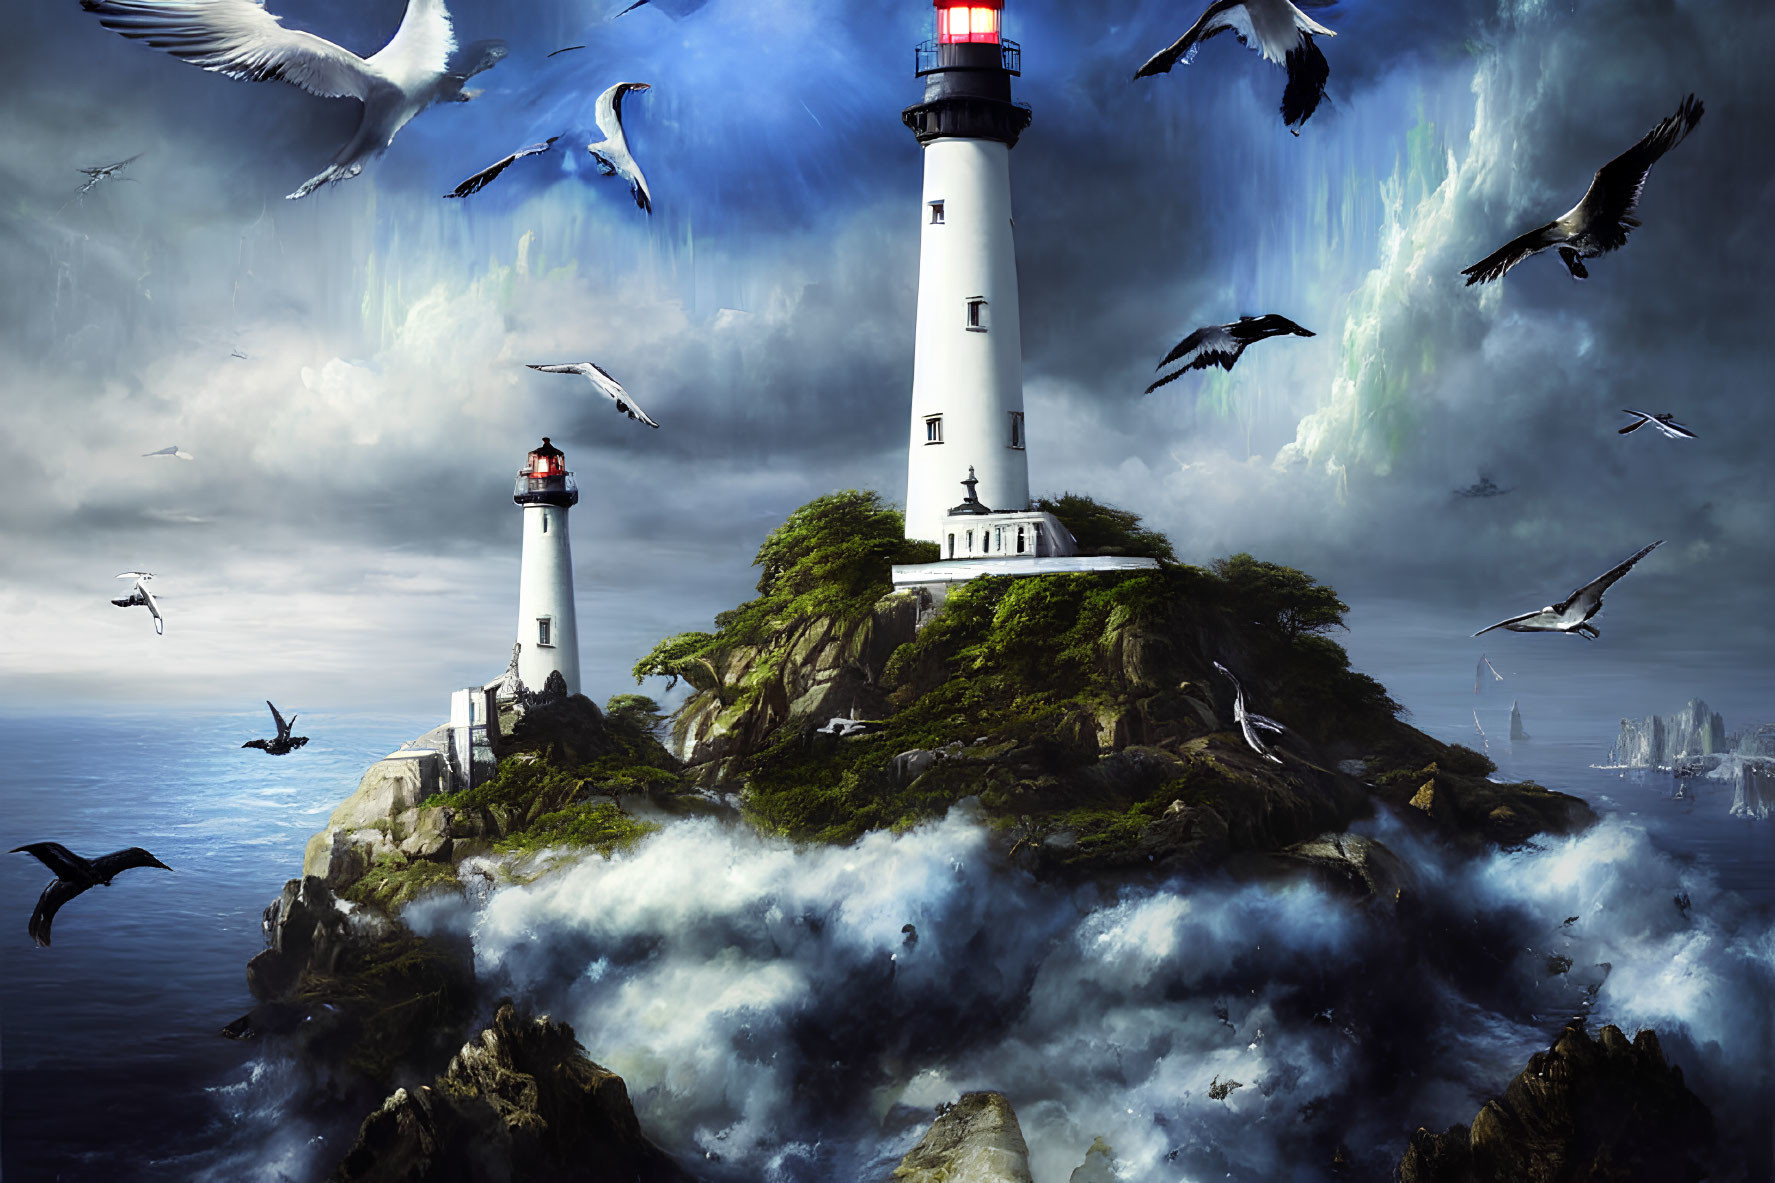 Rugged island with two lighthouses, crashing waves, seagulls, stormy sky